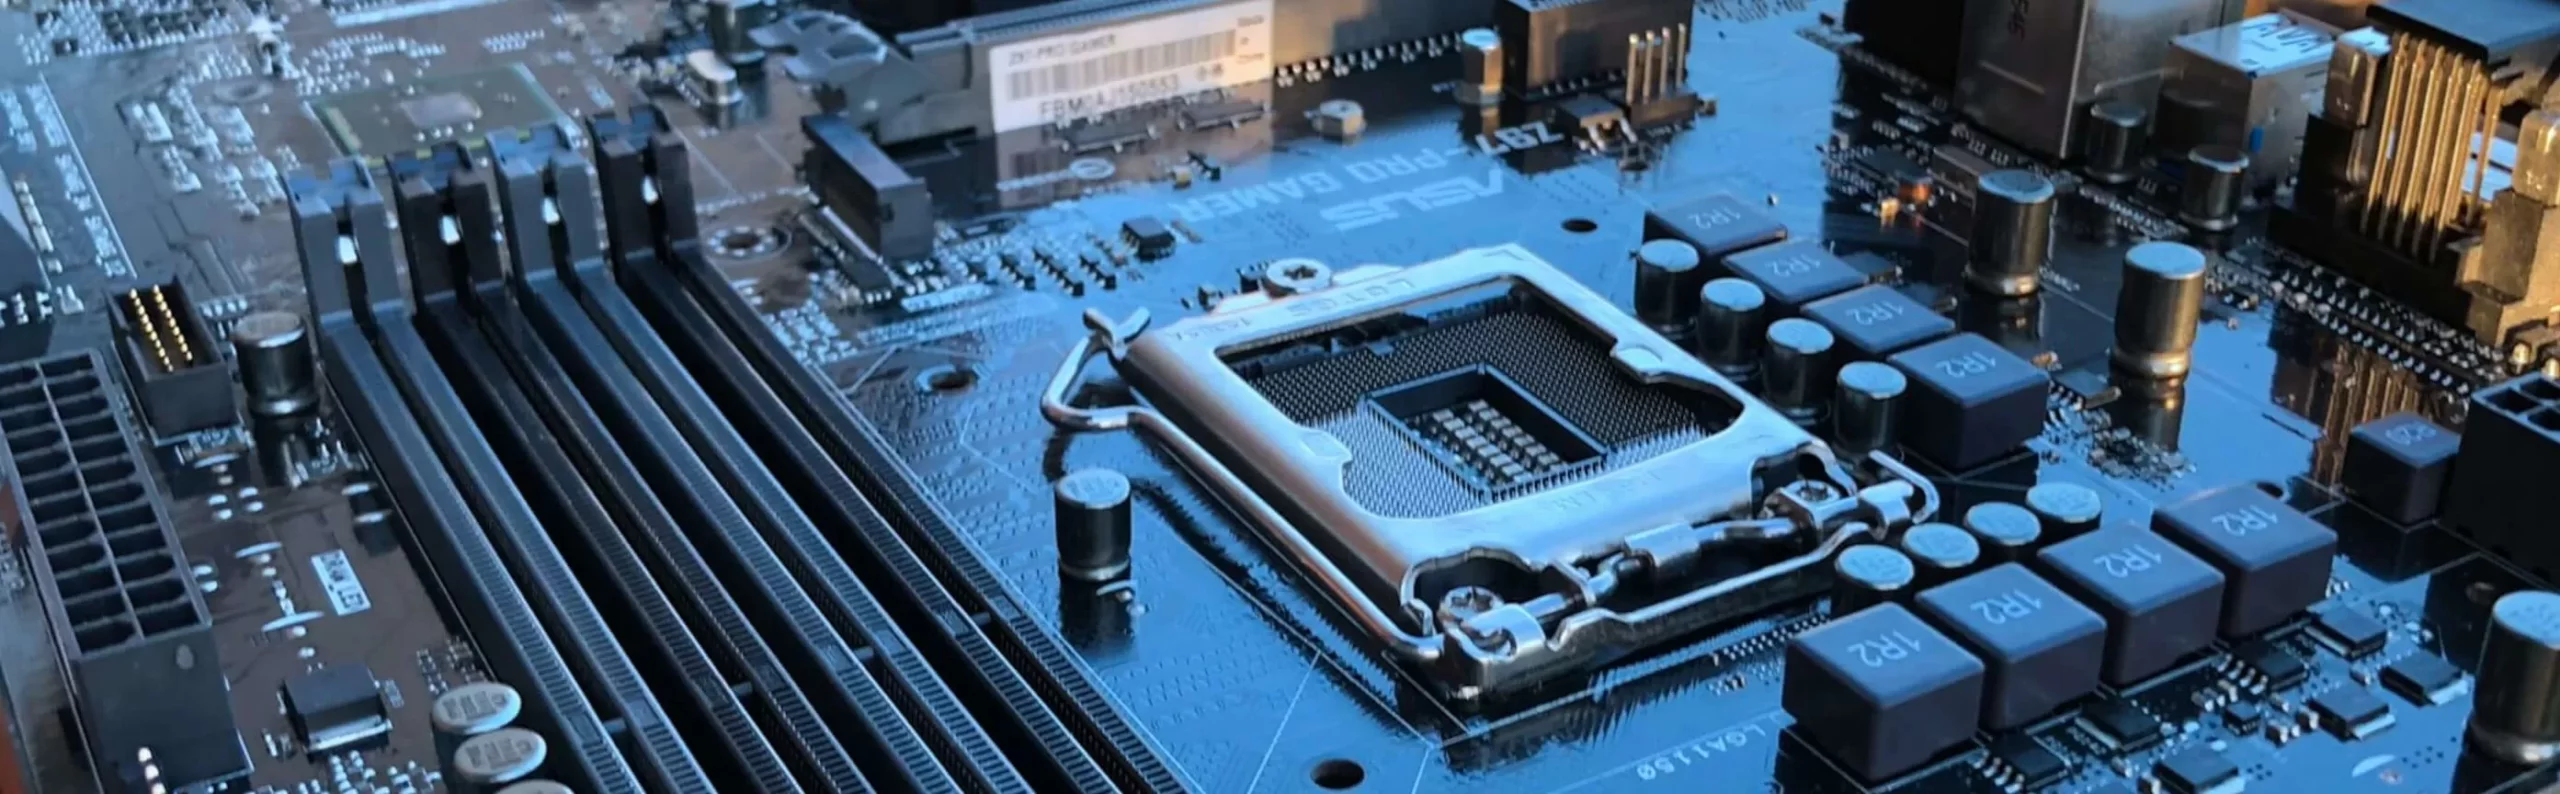 Everything You Need to Know About Motherboard Components and then Some